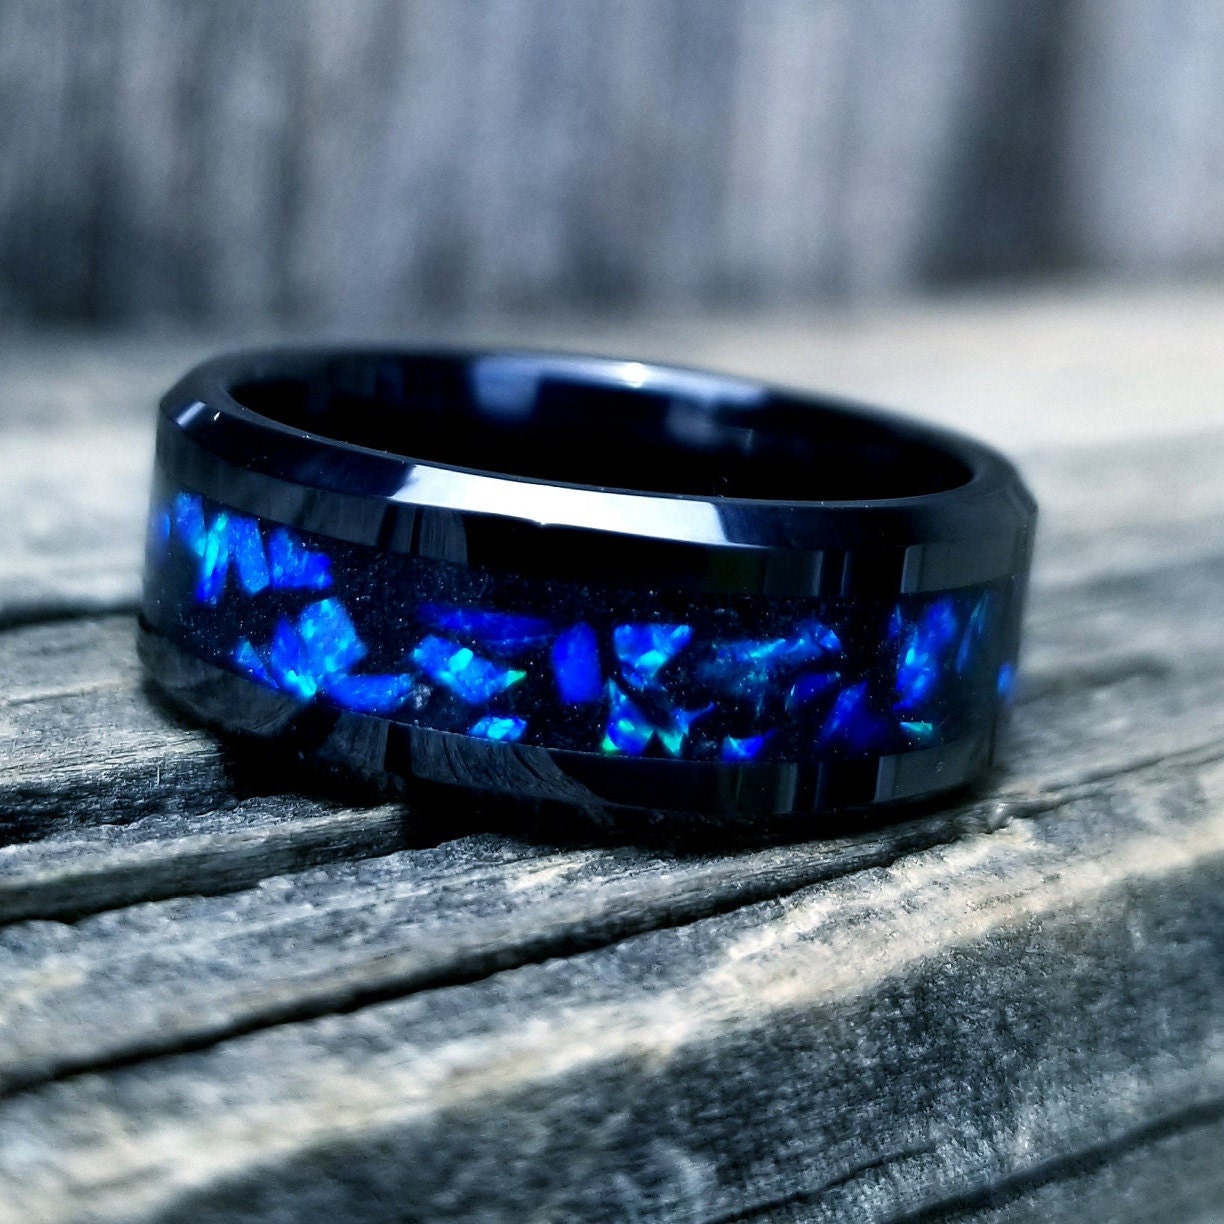 His and Hers Wedding Ring Set. Opal rings. Black Ceramic ring set with violet fire opal and glowstone inlay. 8mm and 6mm rings. Sizes 5-13